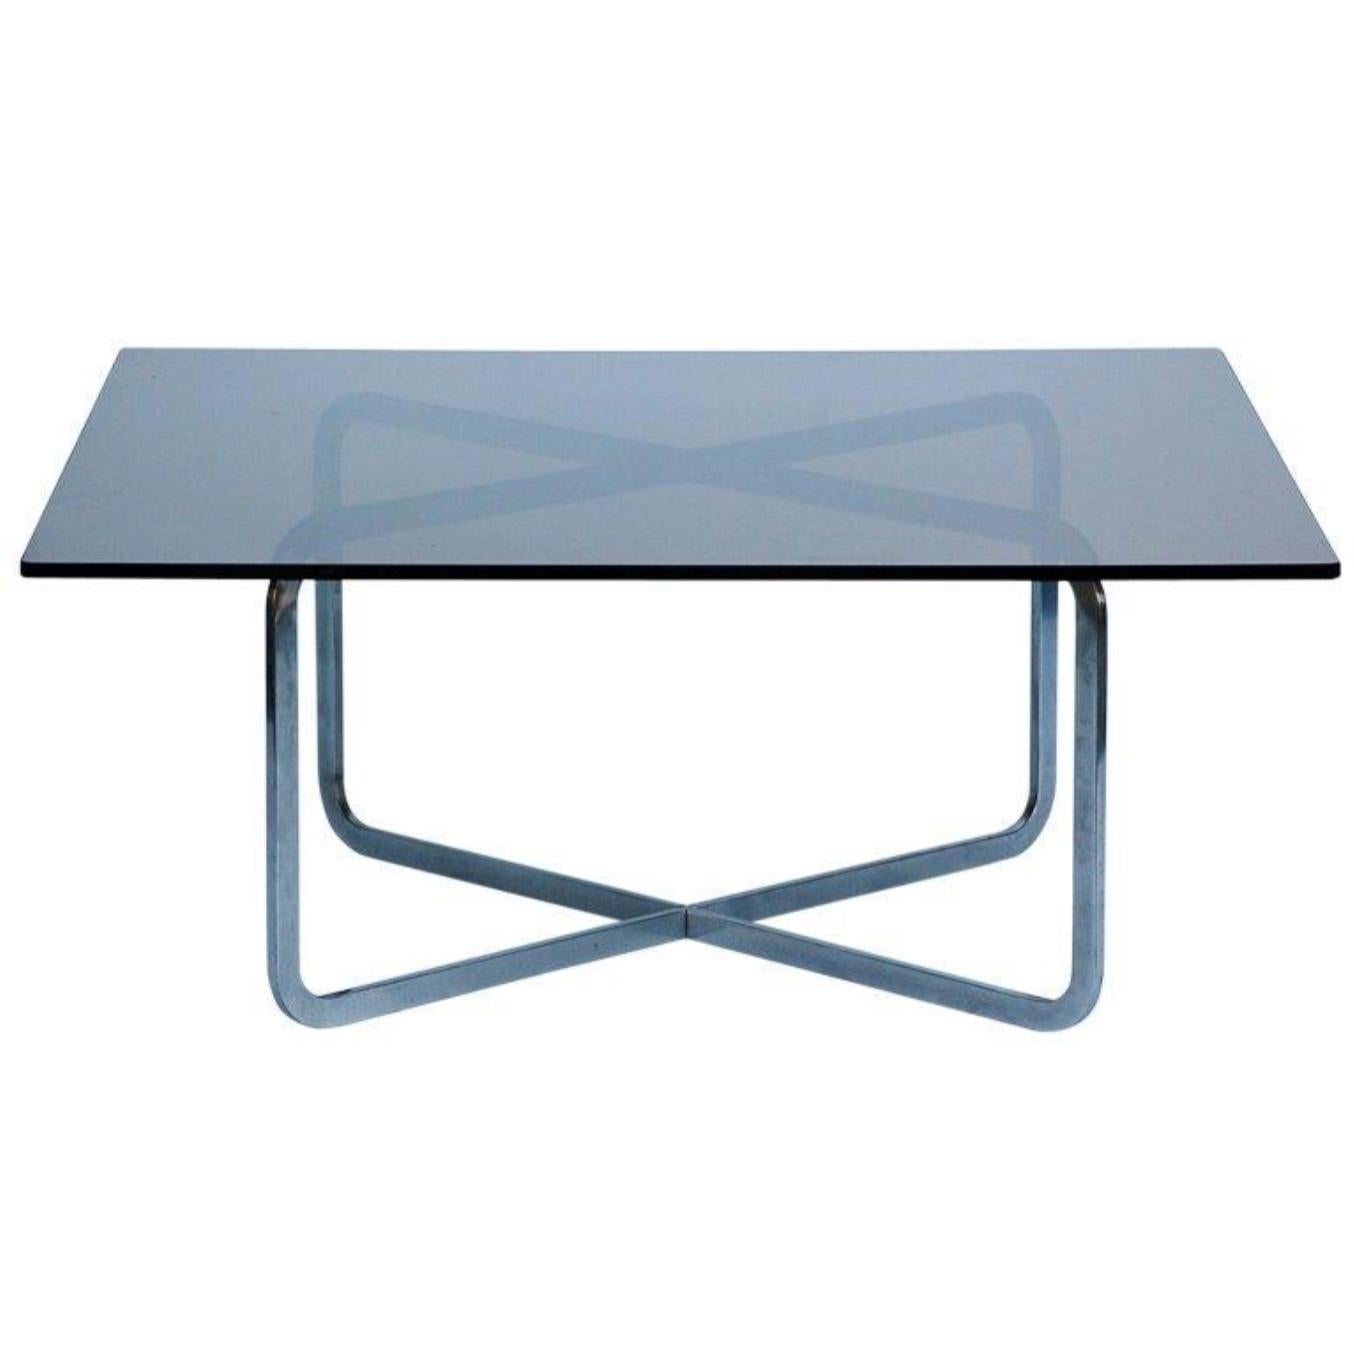 Late 20th Century Brushed Steel and Smoked Glass Coffee Table in the Style of Michel Boyer For Sale